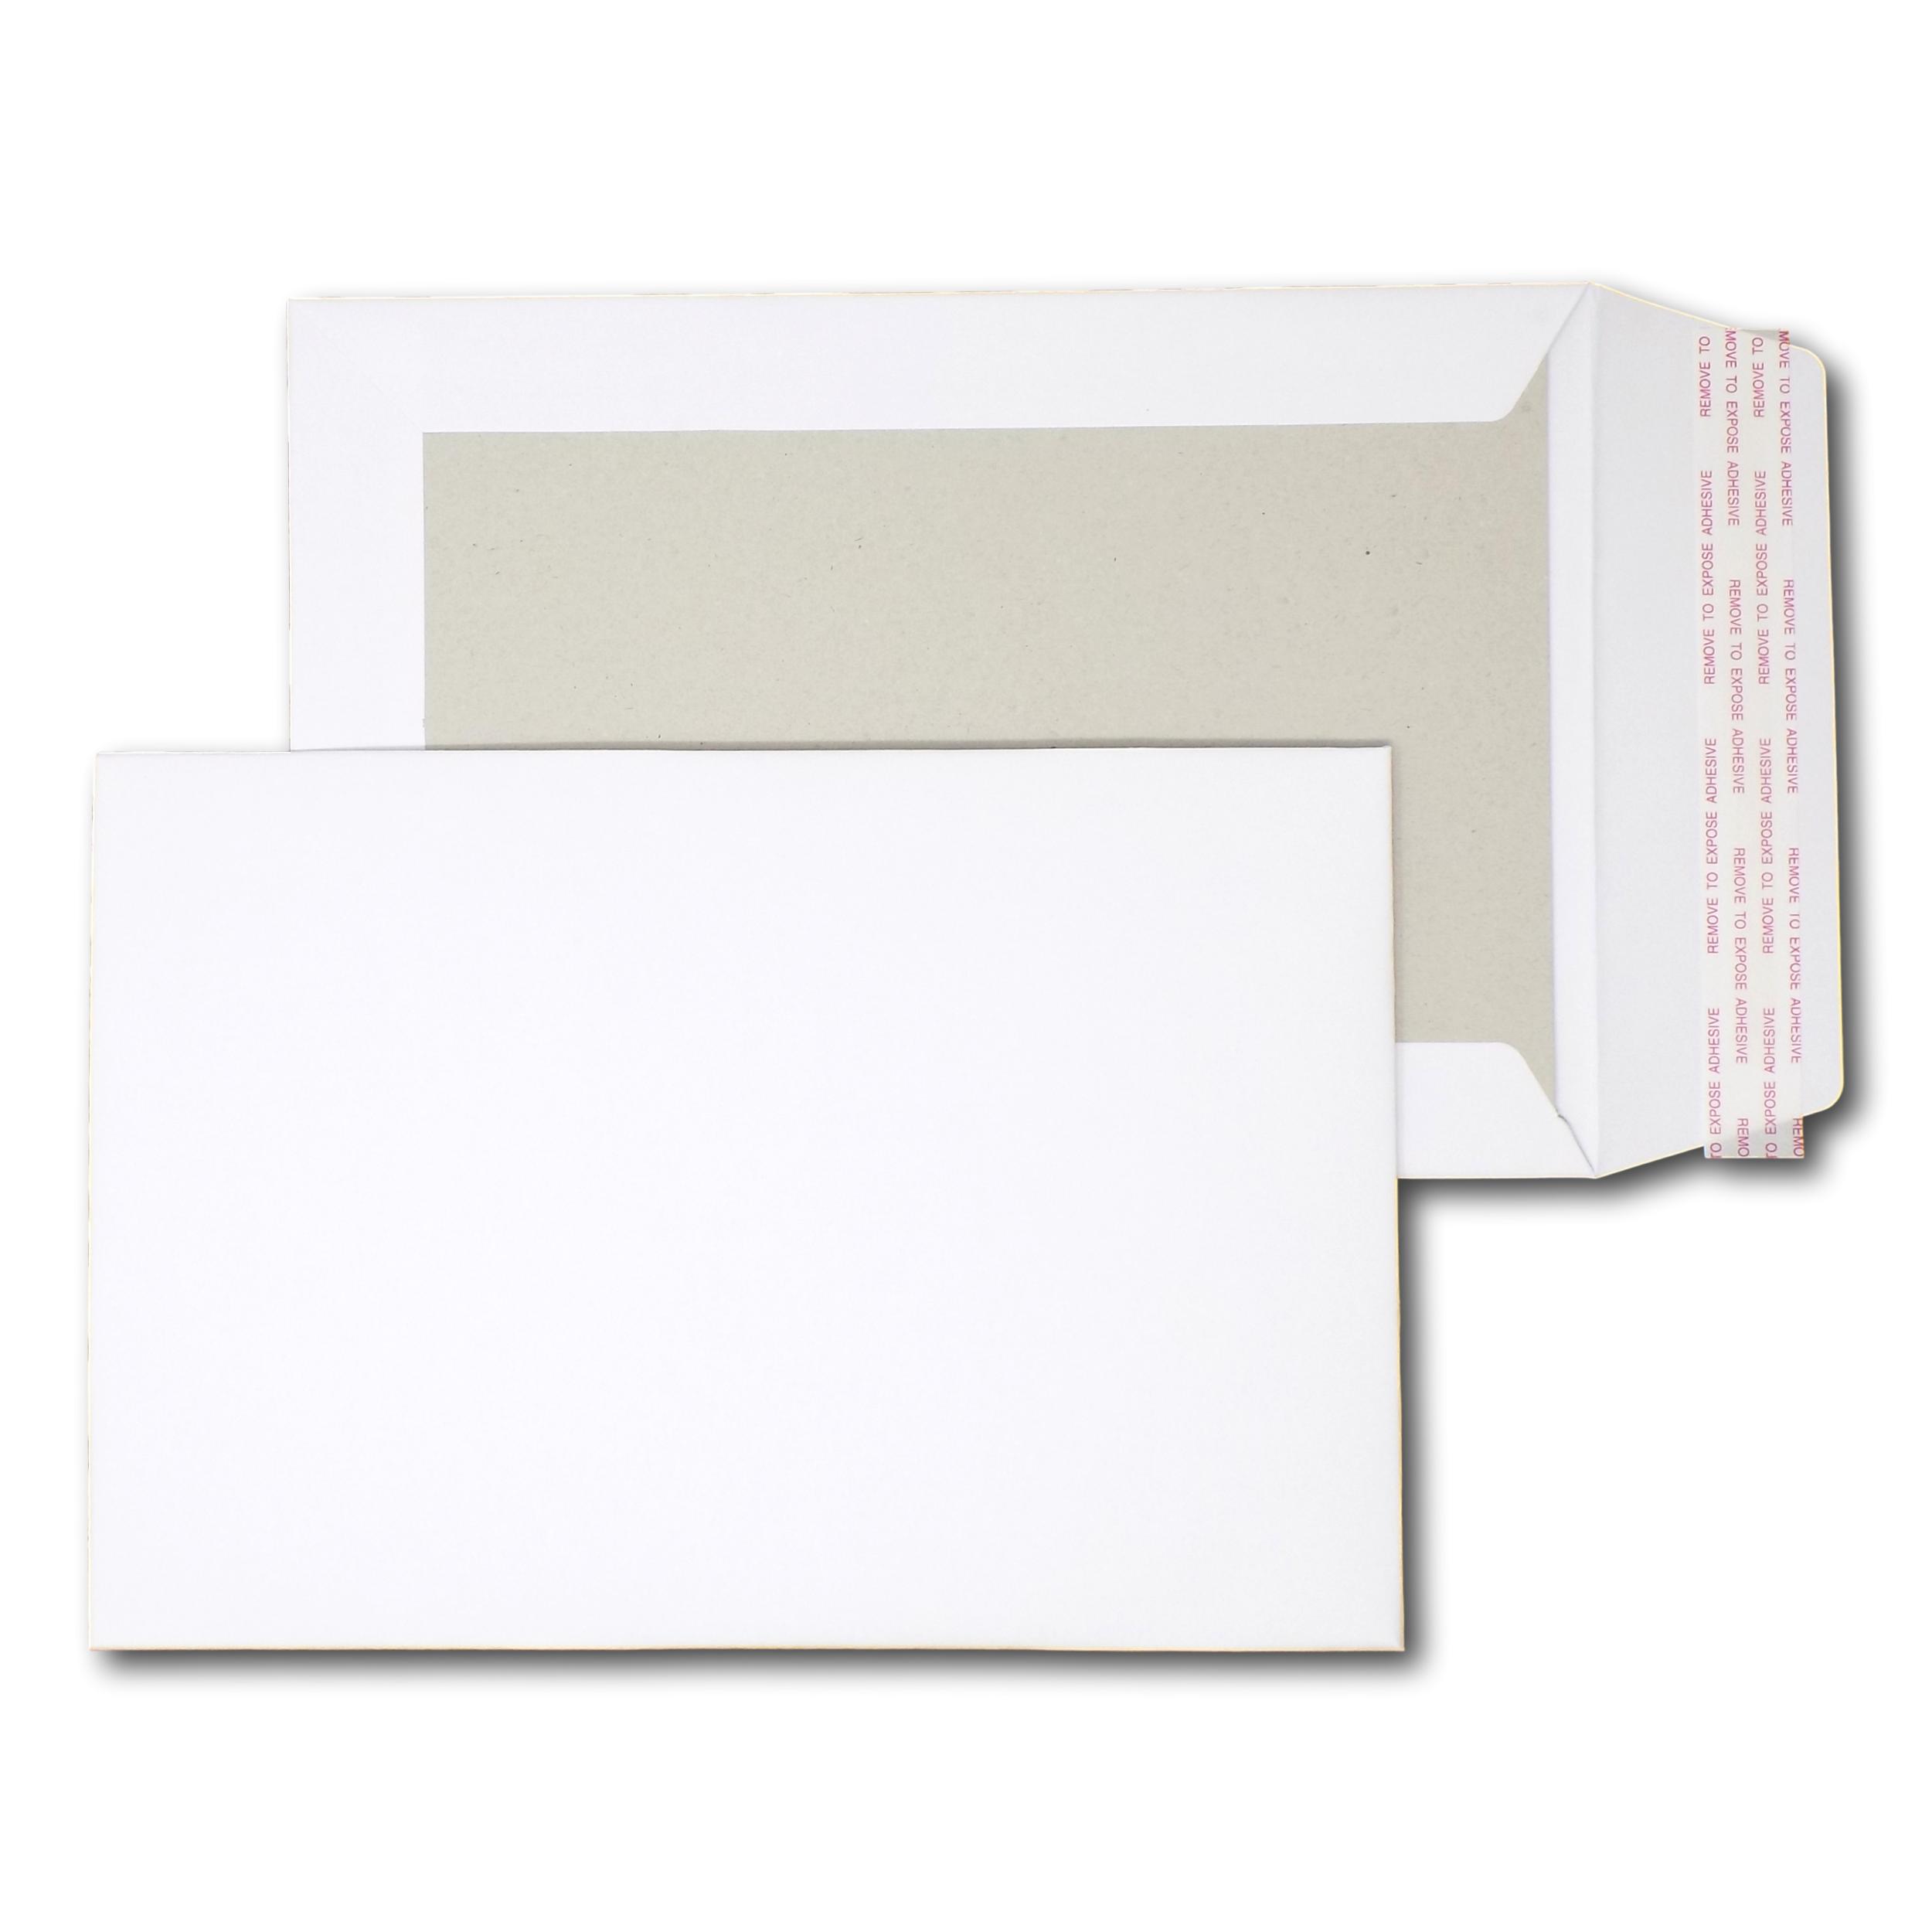 Board Backed Envelopes - A5 / C5 PIP - 238mm x 163mm - PLAIN - WHITE - Pack of 25